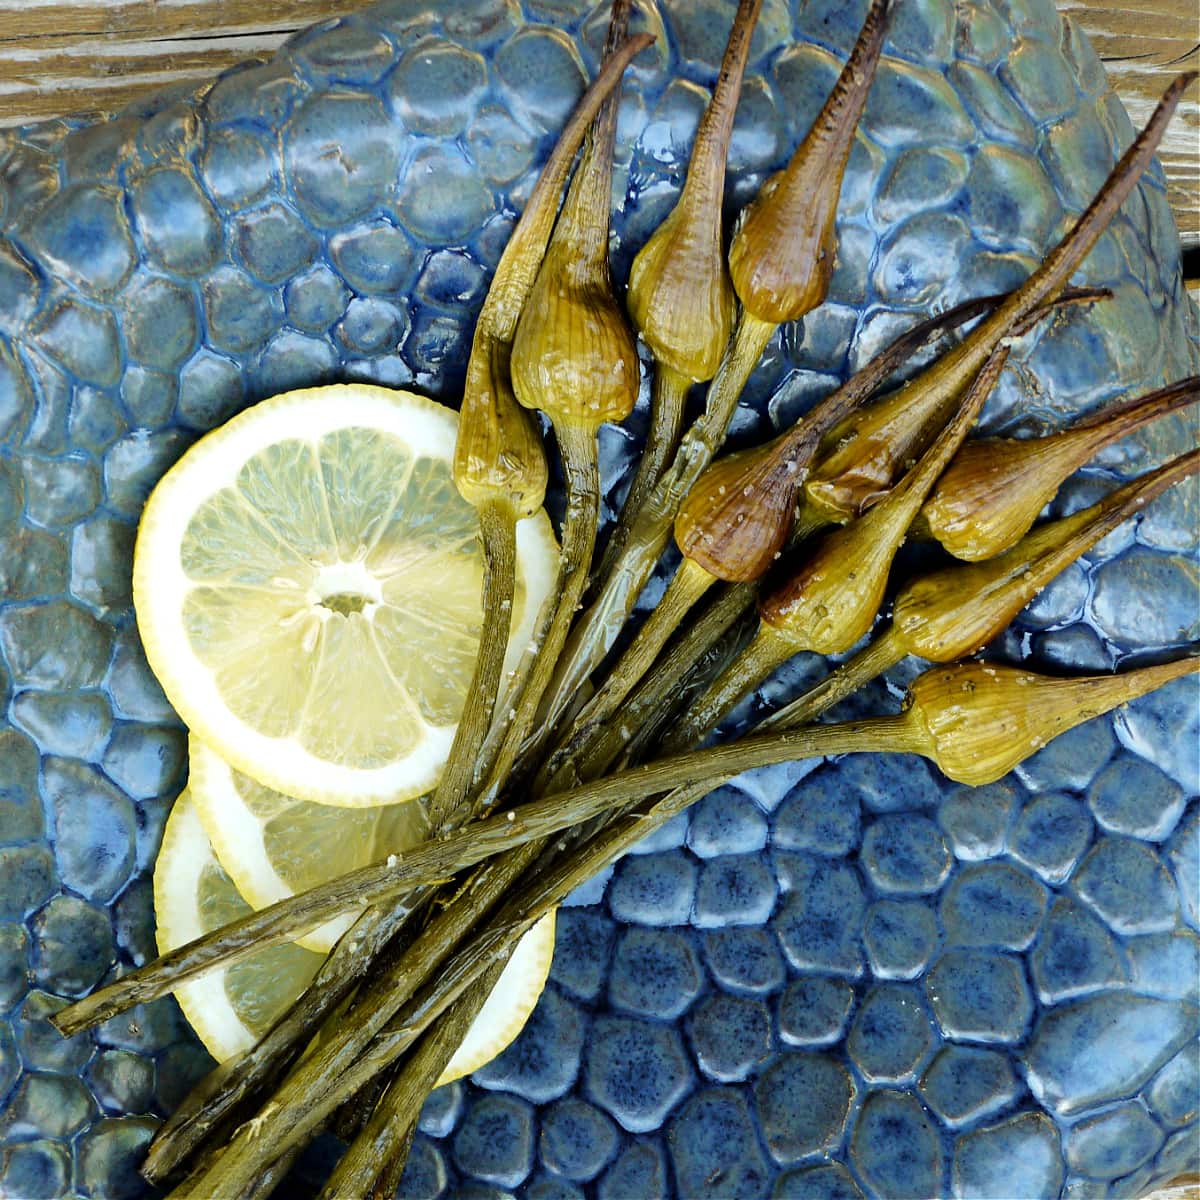 Roasted garlic spears on a highly textured plate, with lemon slices.